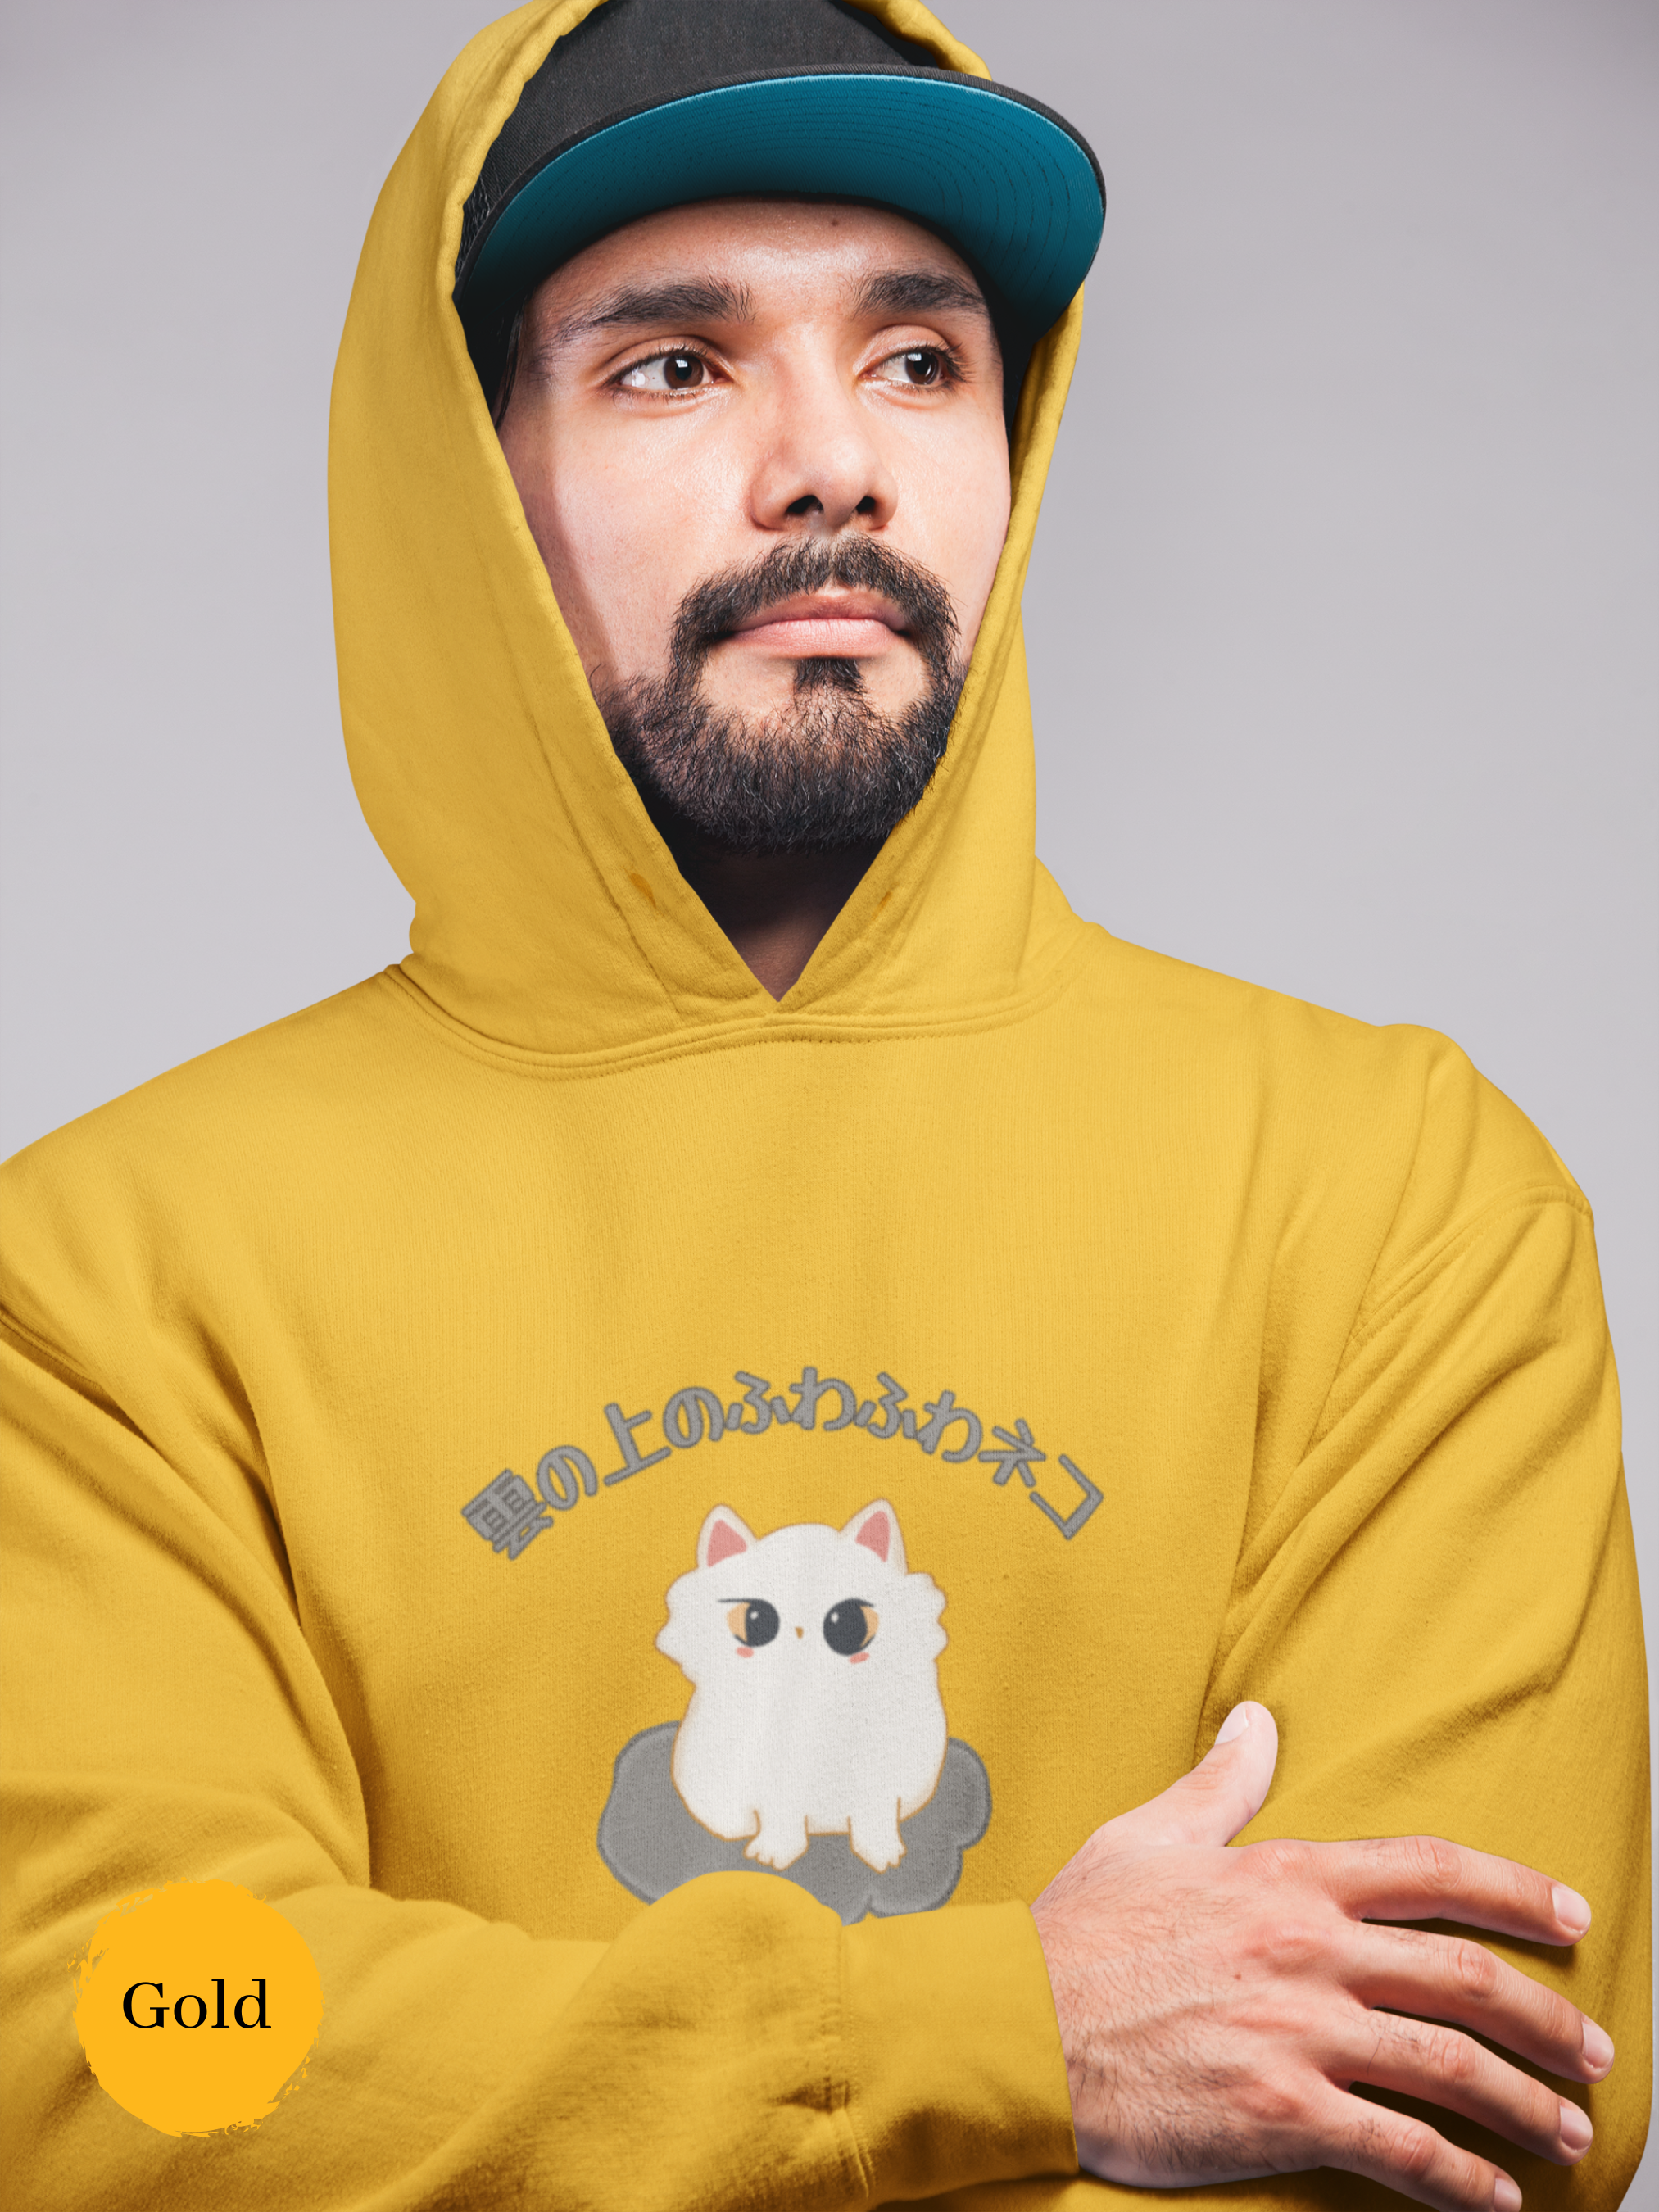 Cat Hoodie: Fluffy Cloud Cat Artwork for Cat Lovers - Kawaii Cat Hoodies and Pun Hoodies Collection